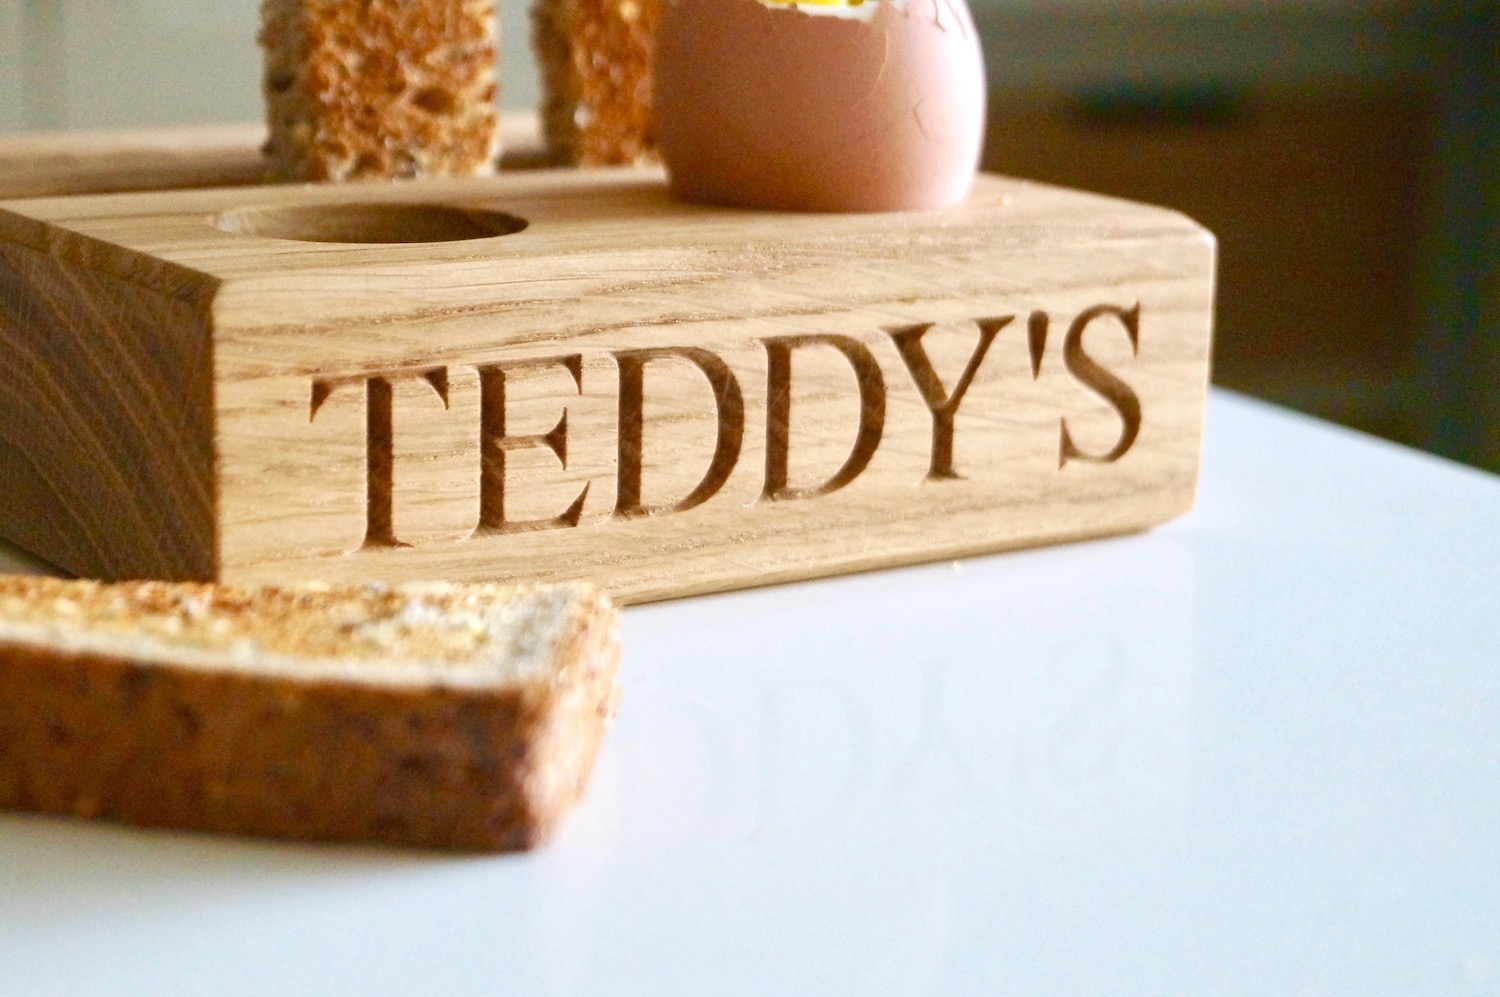 egg-and-soldiers-wooden-block